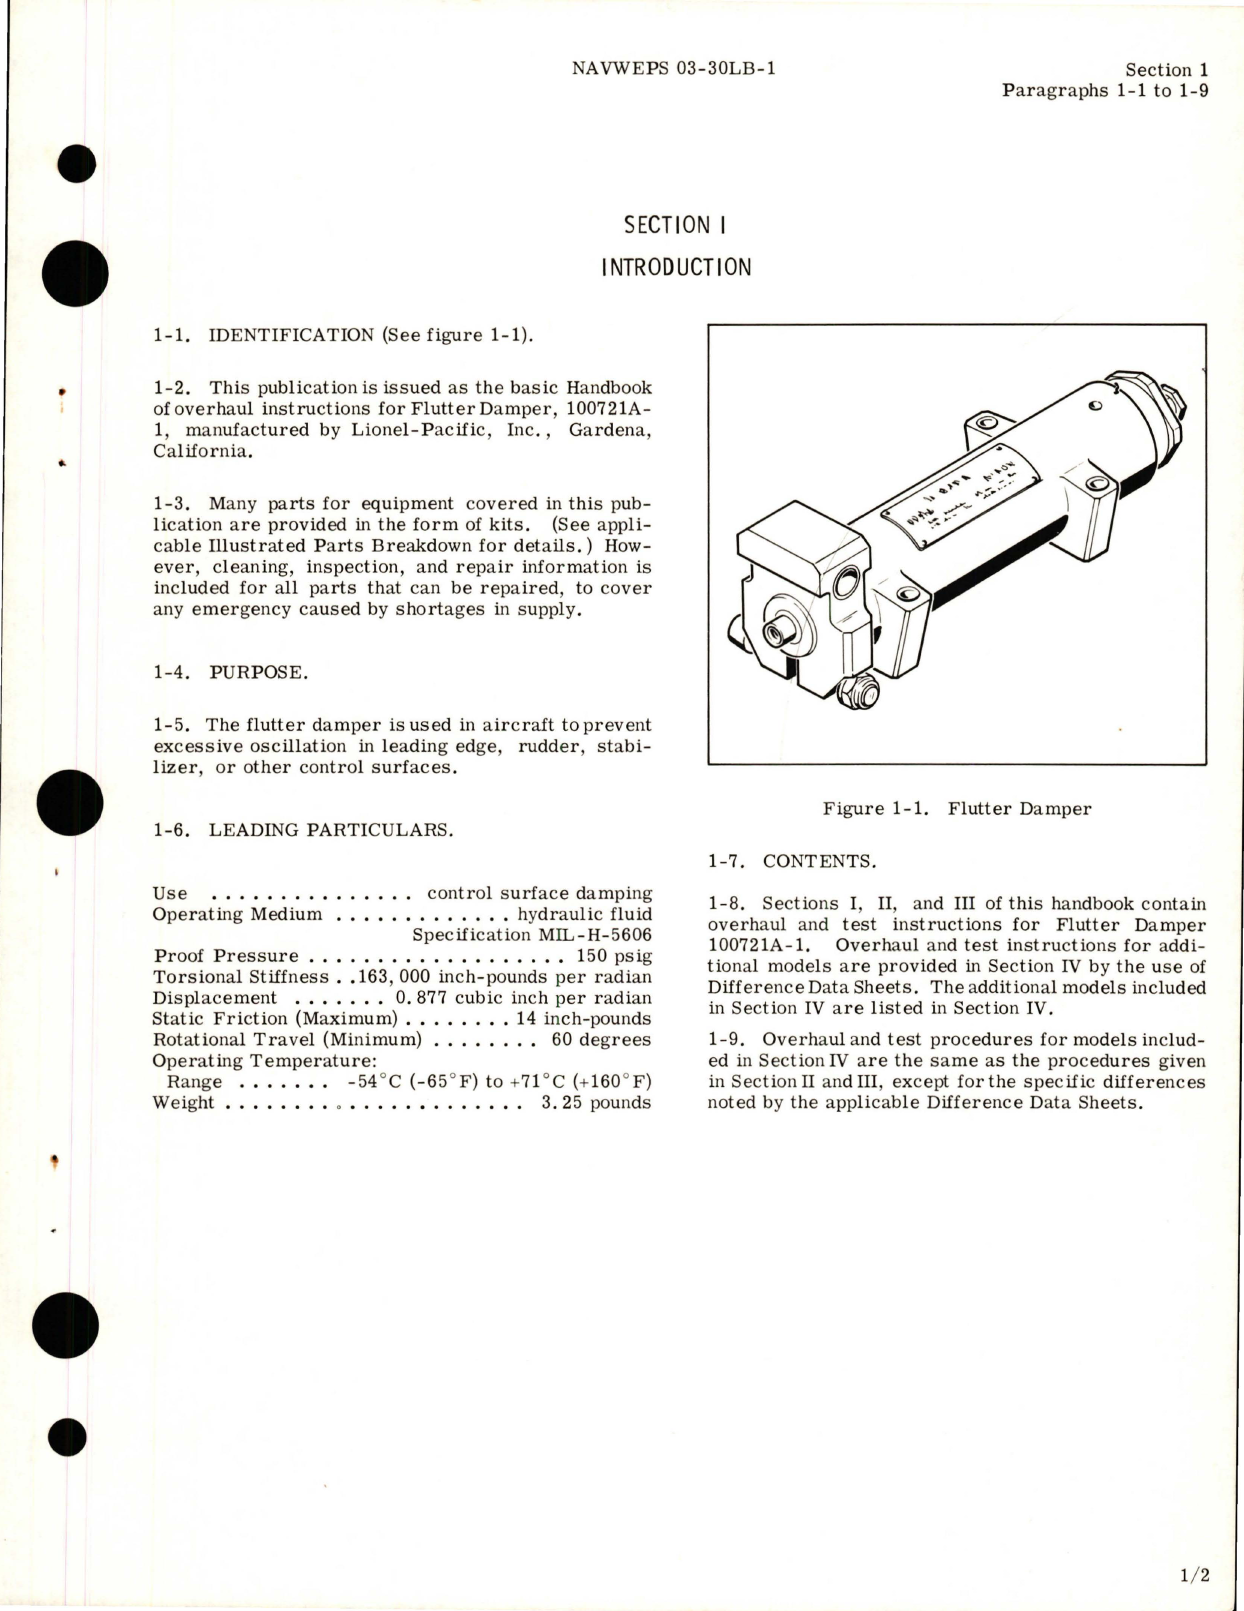 Sample page 5 from AirCorps Library document: Overhaul Instructions for Flutter Dampers - Parts 100721A, 100721A-1, 100721A-3, 100723A & 100723A-1